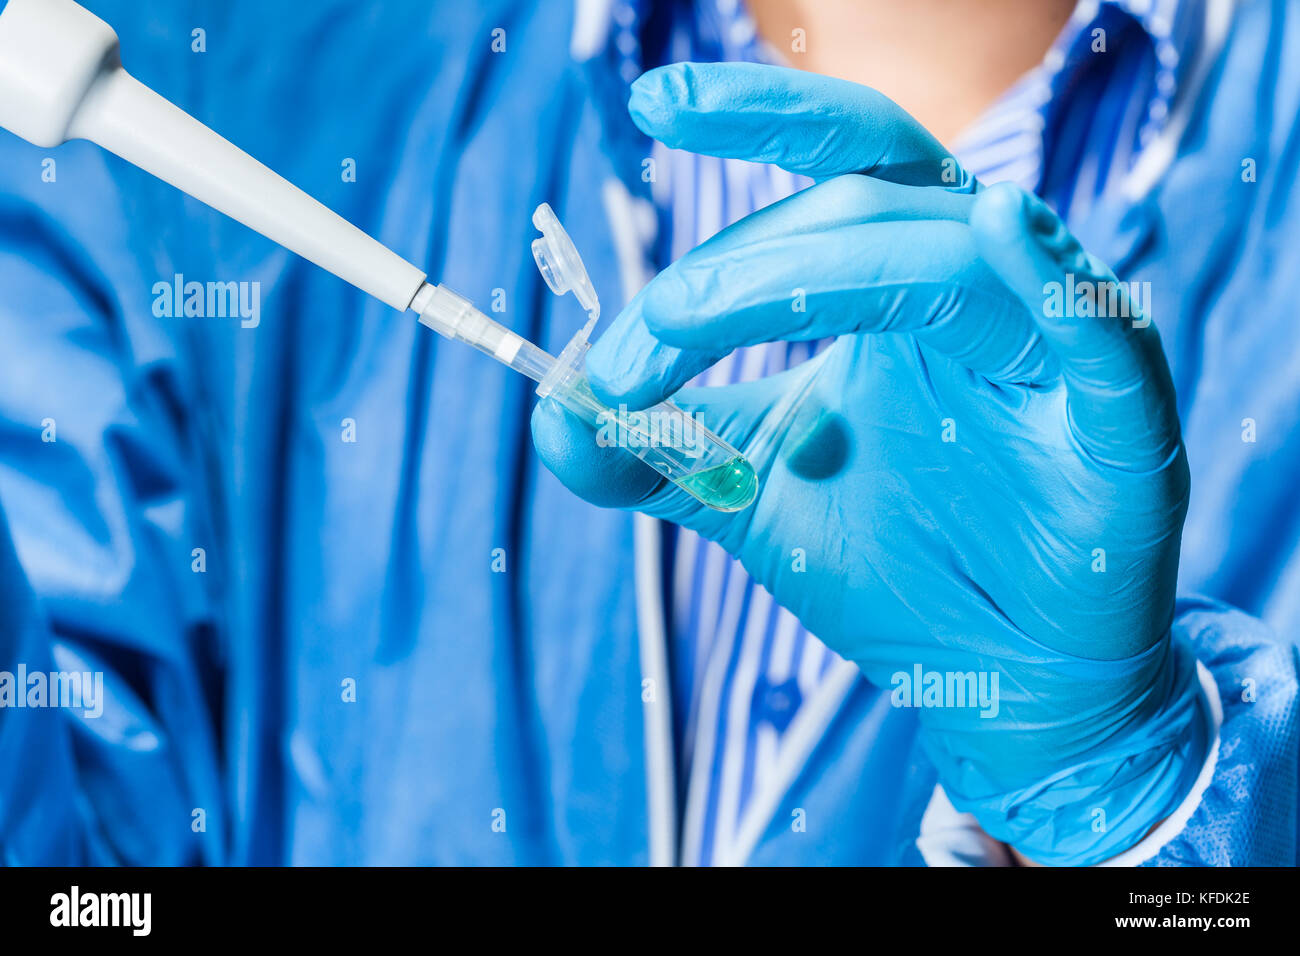 Scientist holding an eppendorf tube and pipette Stock Photo